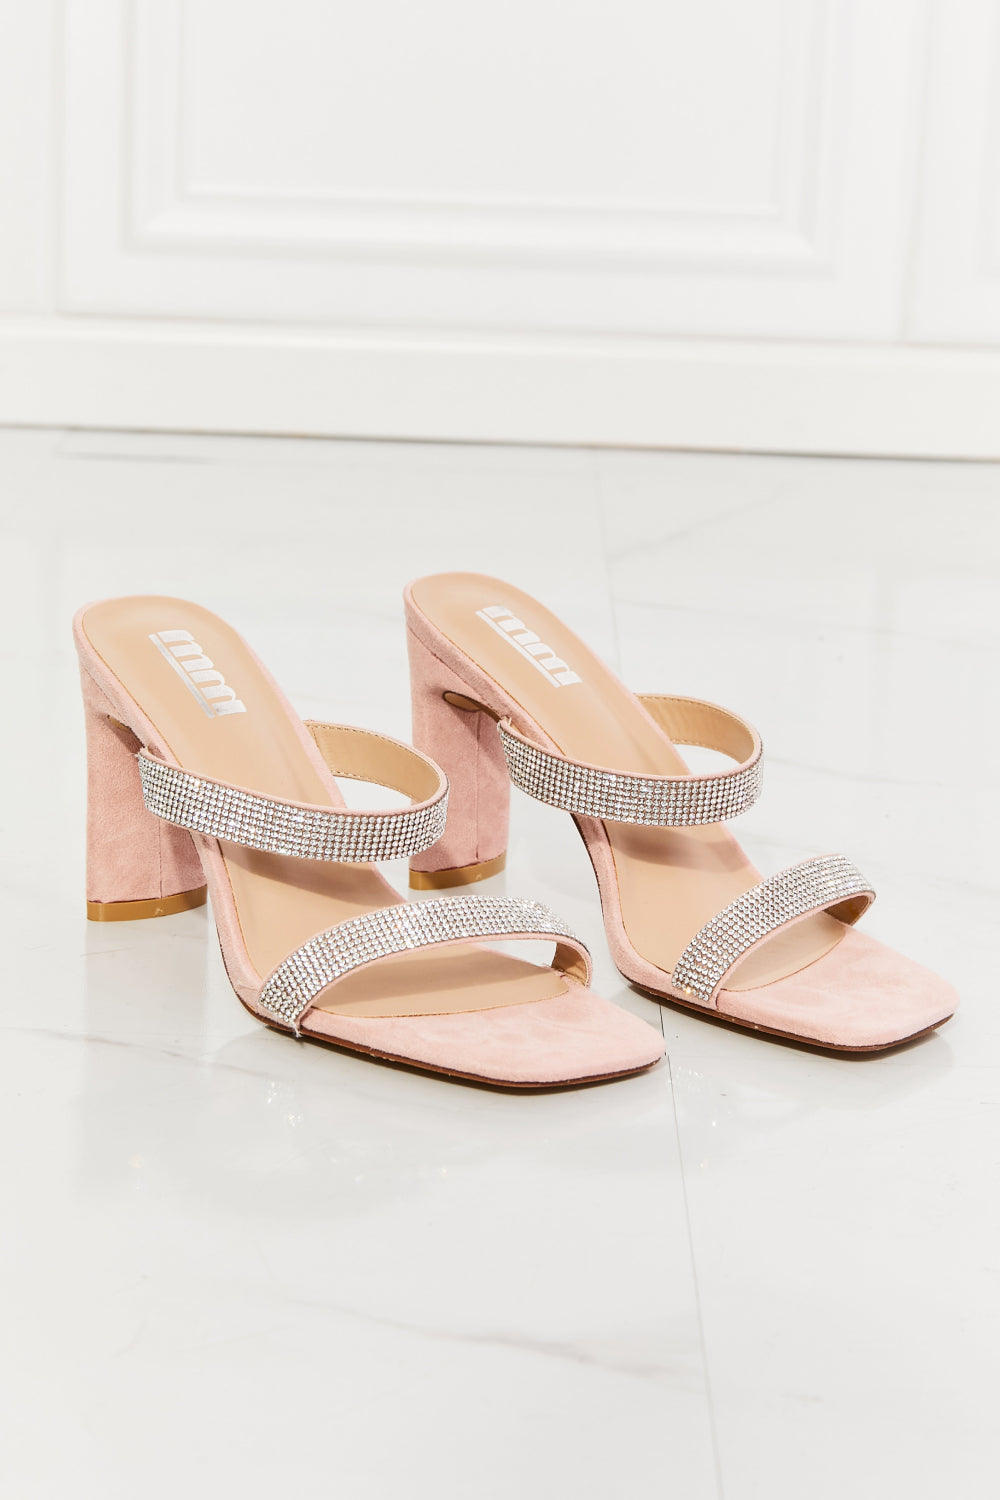 MMShoes Rhinestone Block High Heel Slide On Double Band Sandal in Dusty Pink Rose Leave A Little Sparkle